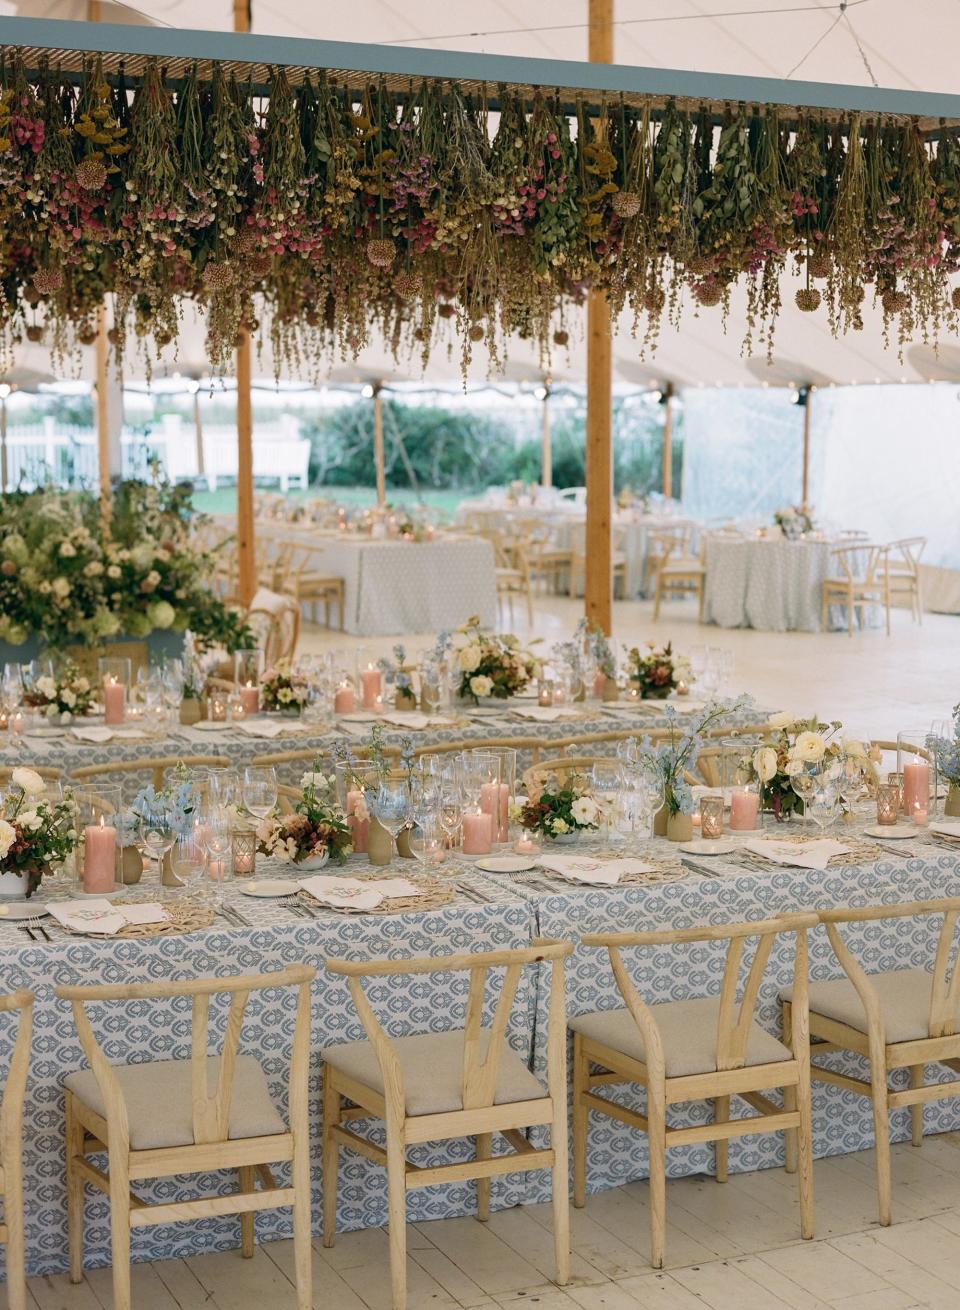 A wedding in a tent with blue tablecloths and florals hanging from the ceiling.